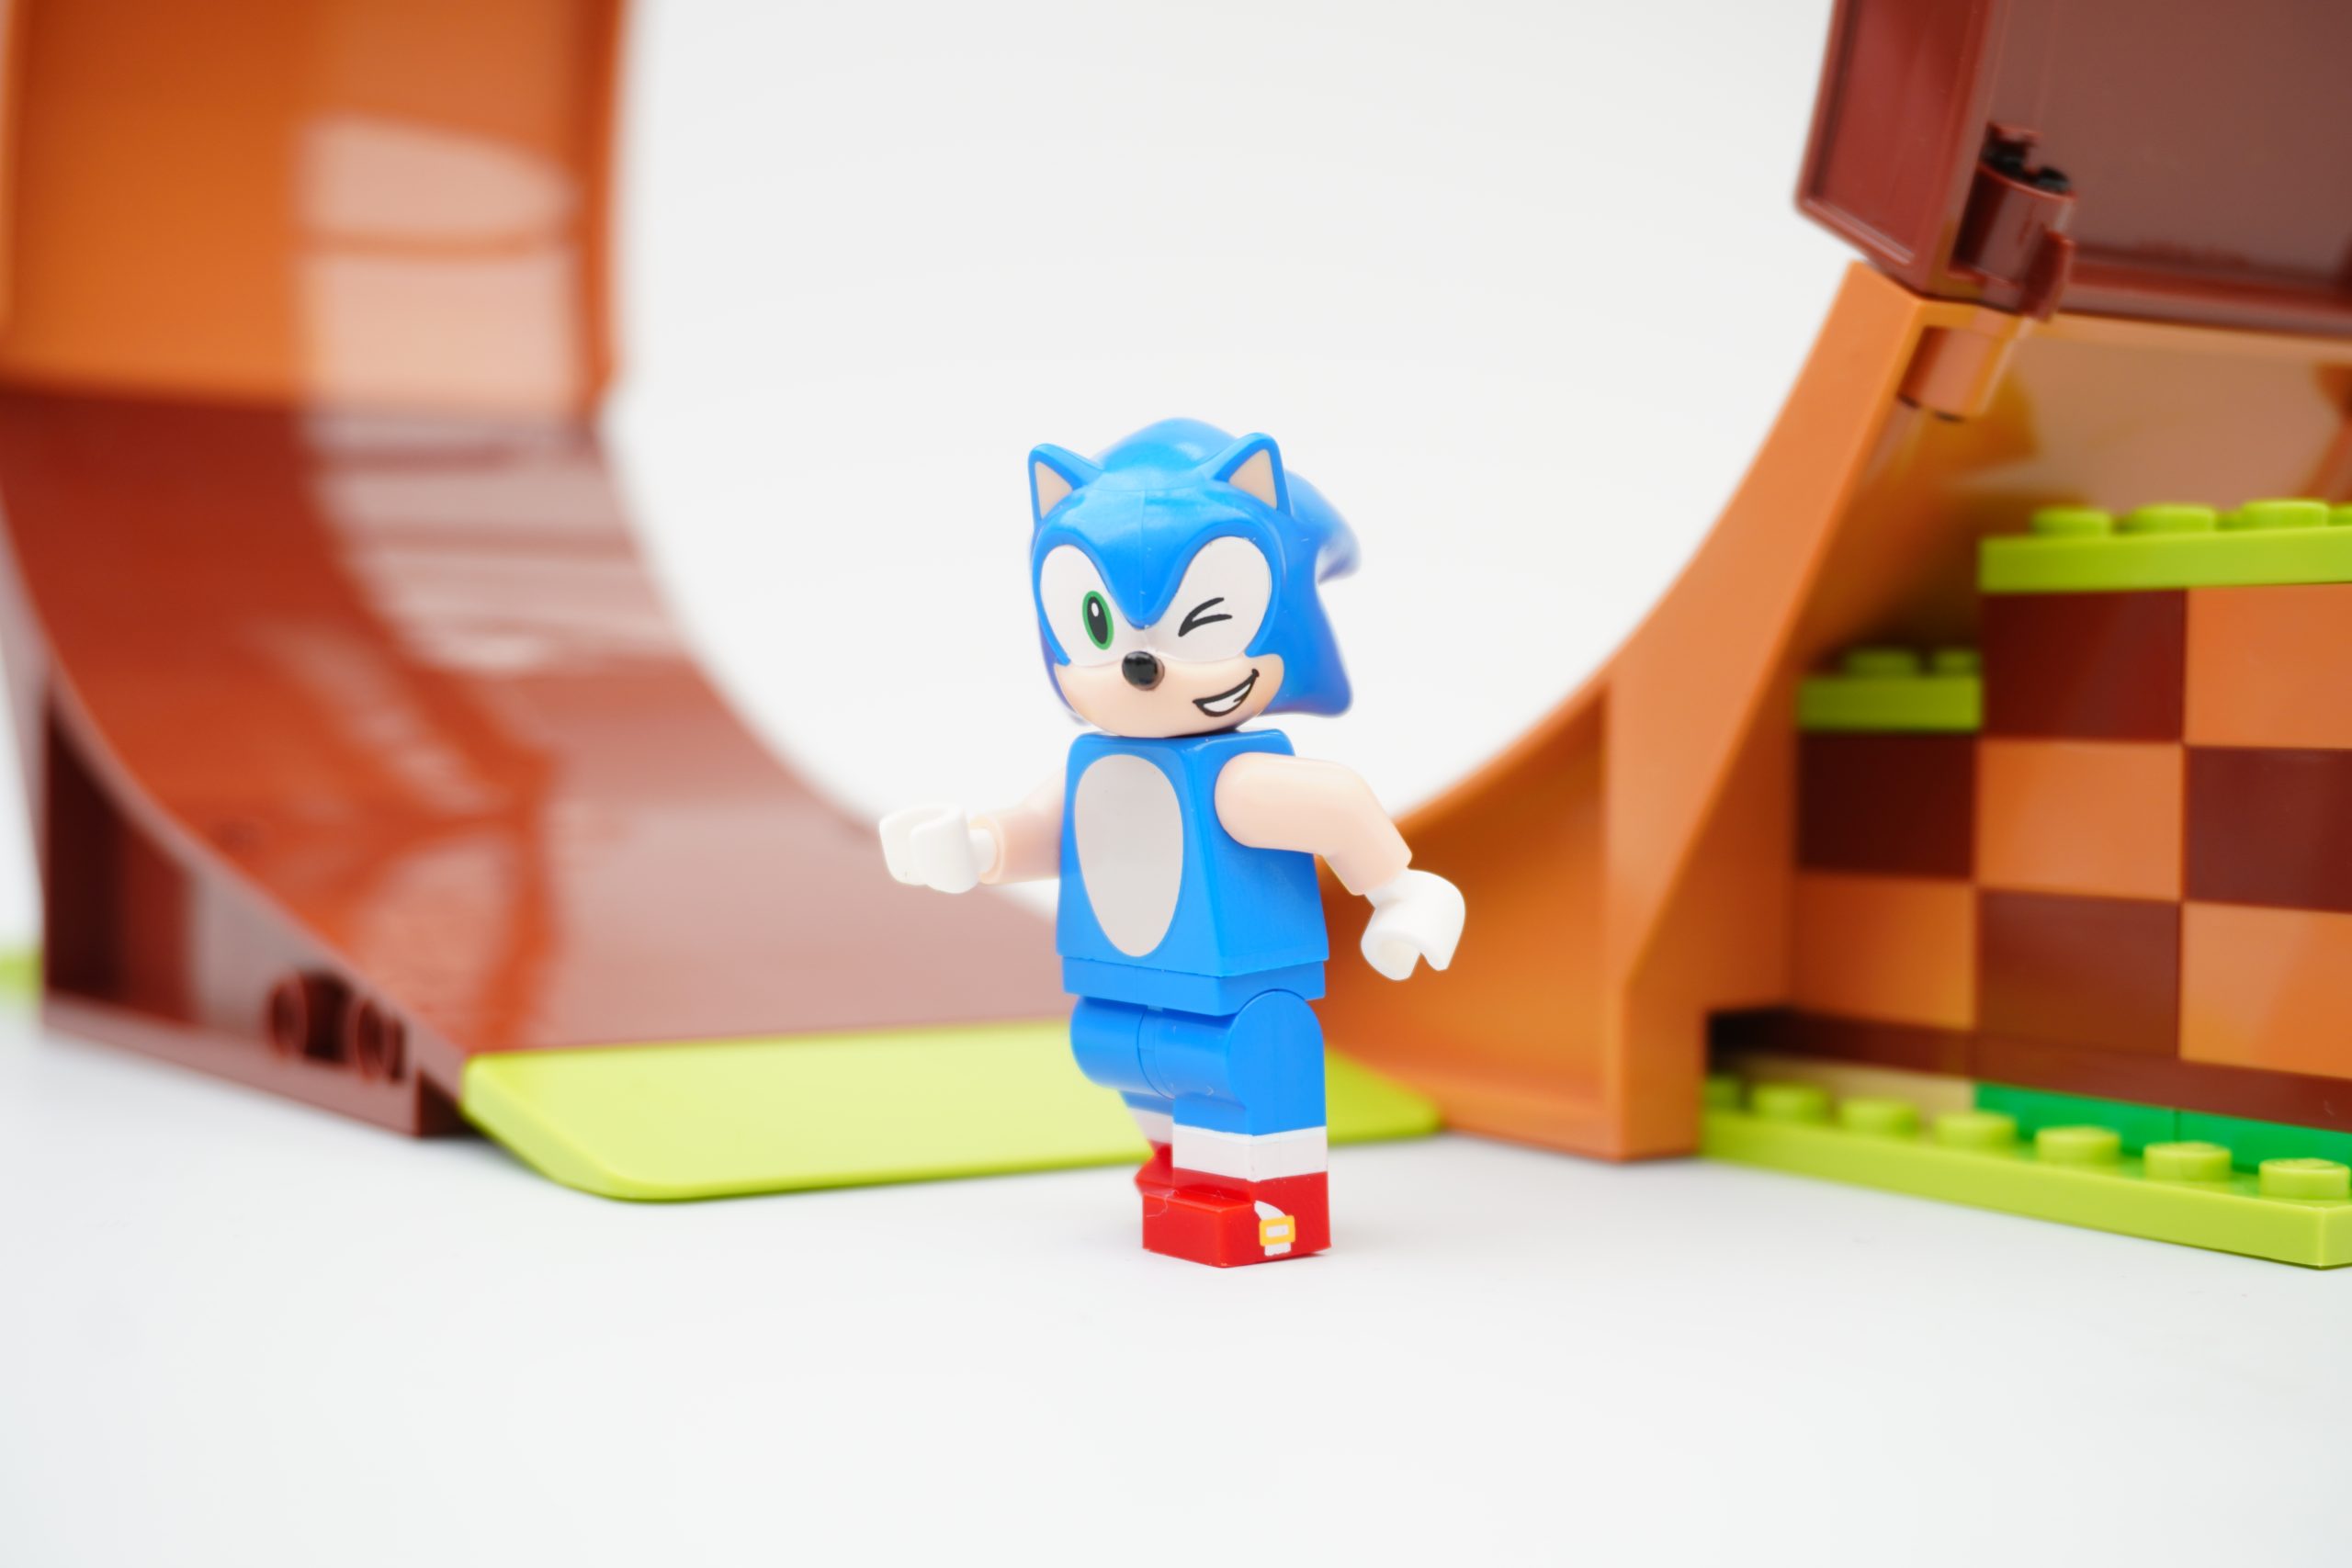  LEGO Sonic The Hedgehog Sonic's Green Hill Zone Loop